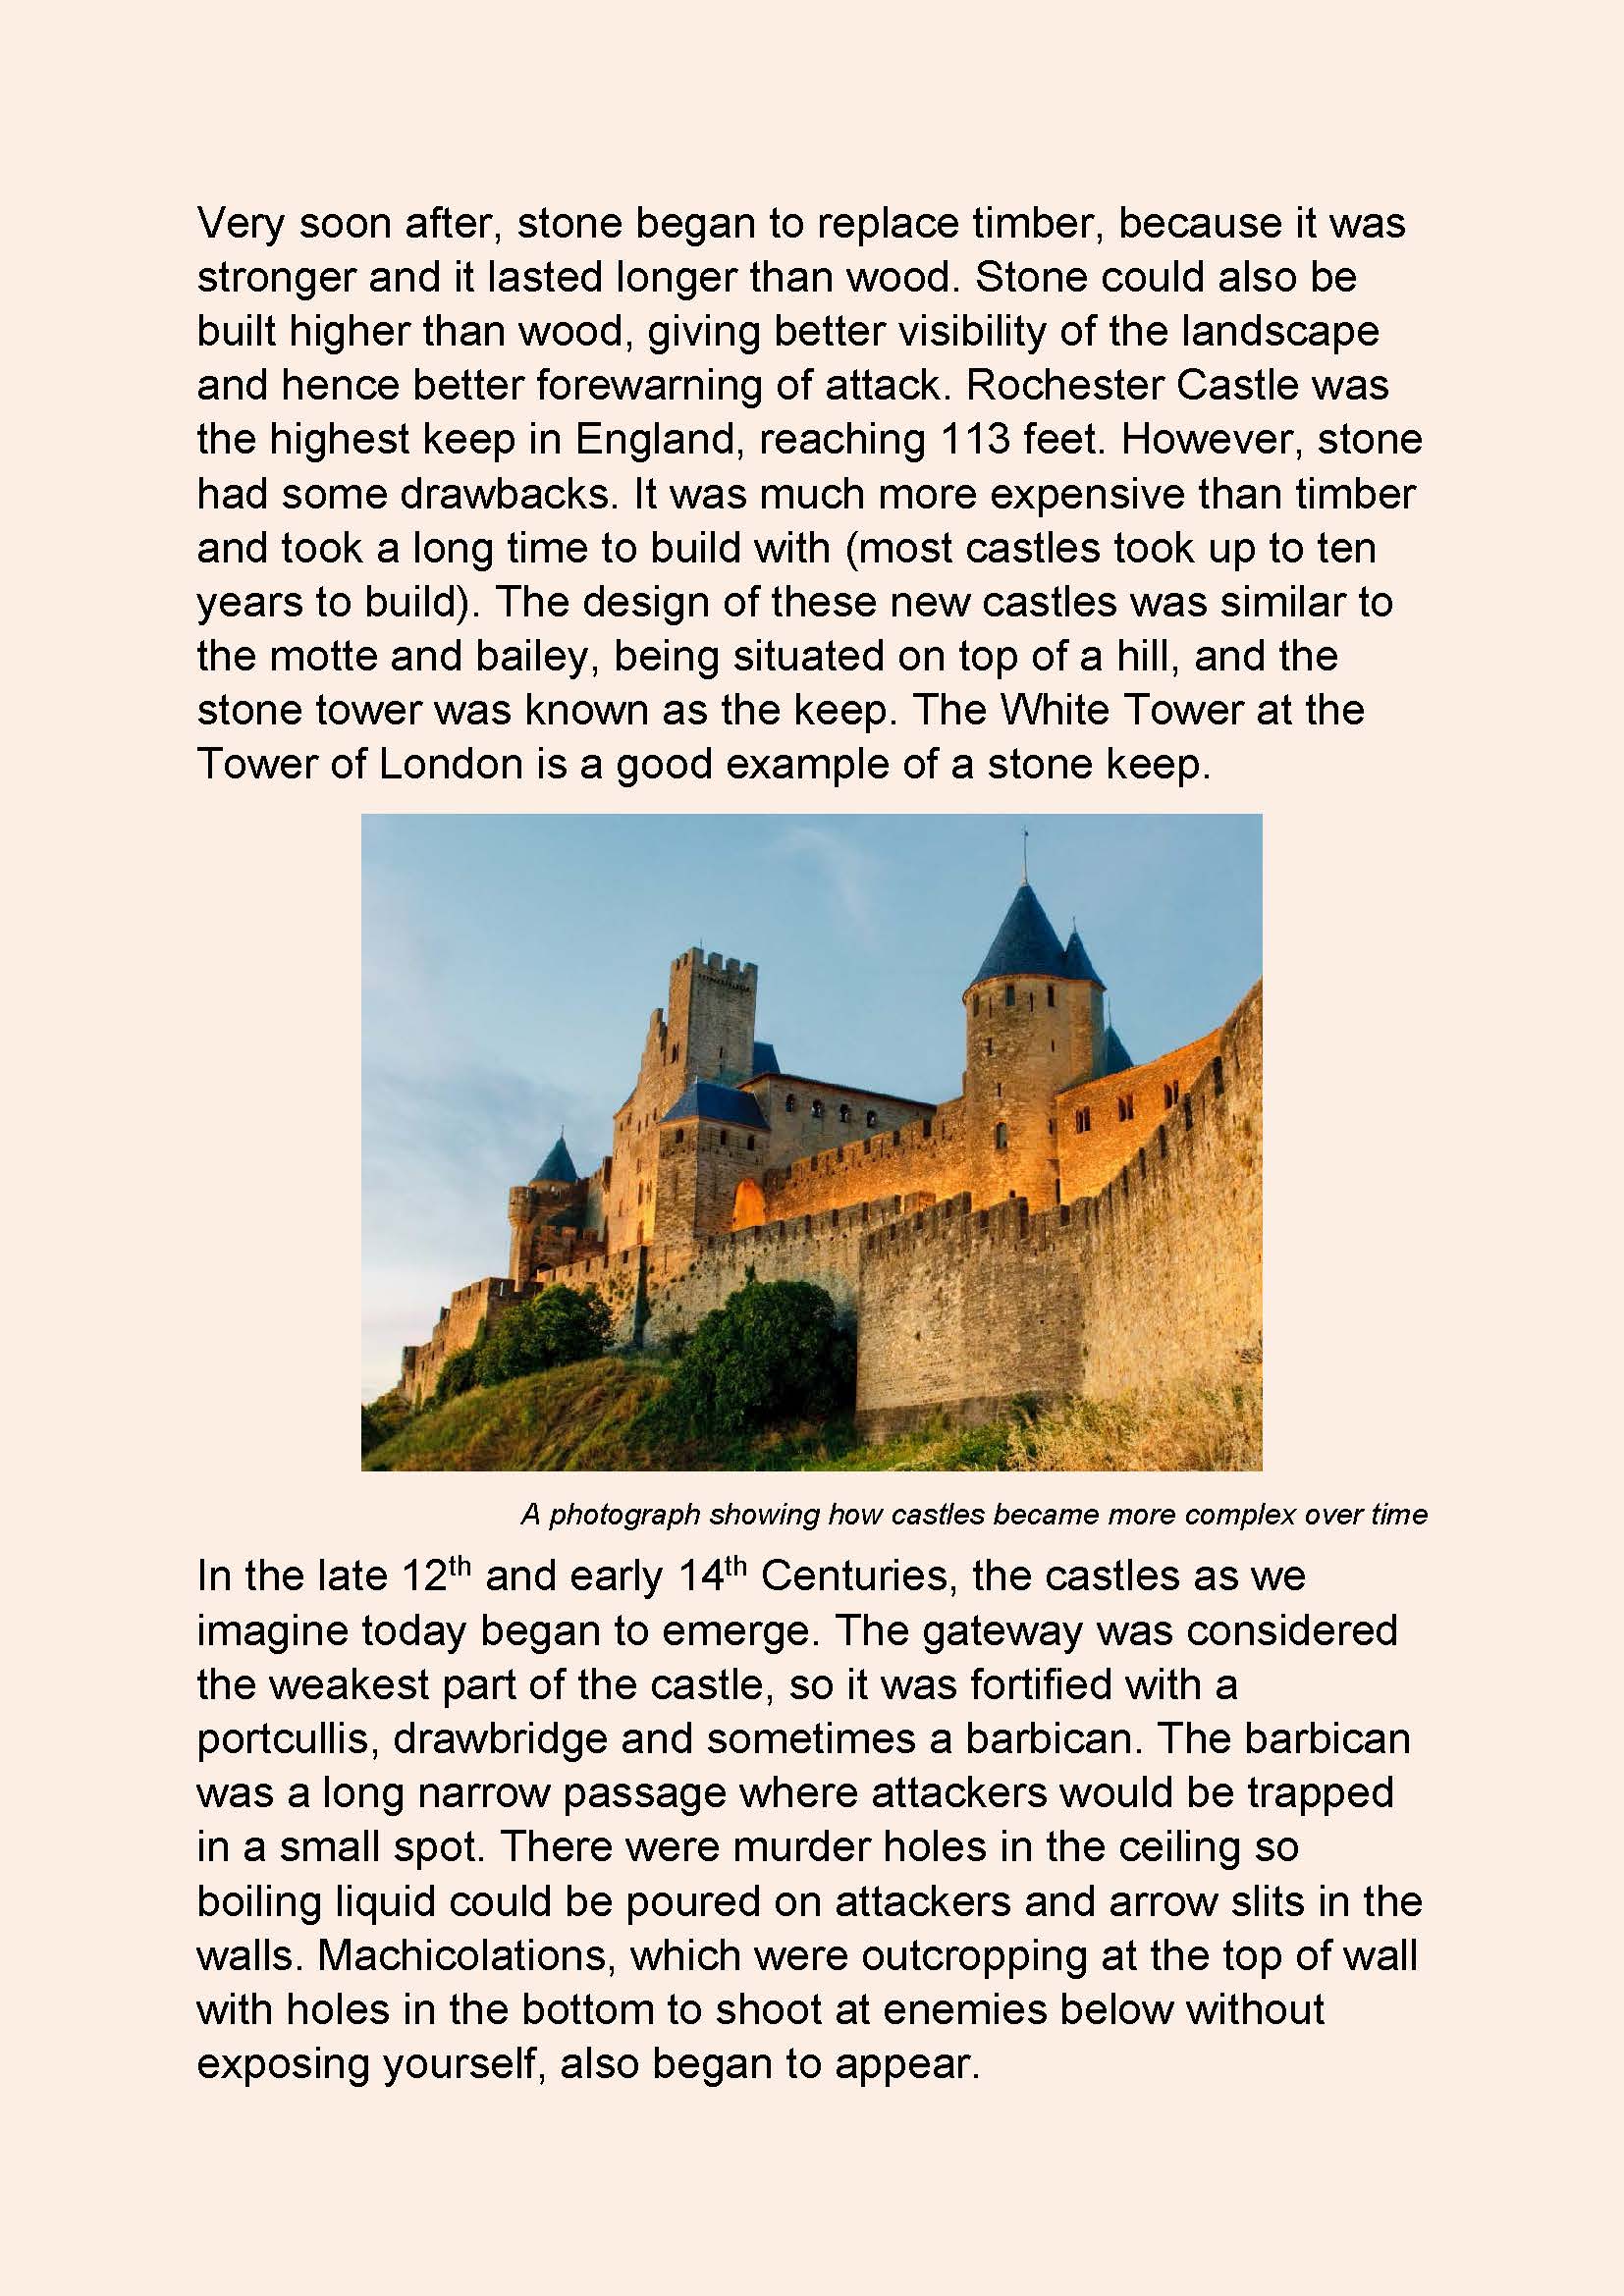 how to describe a castle in creative writing